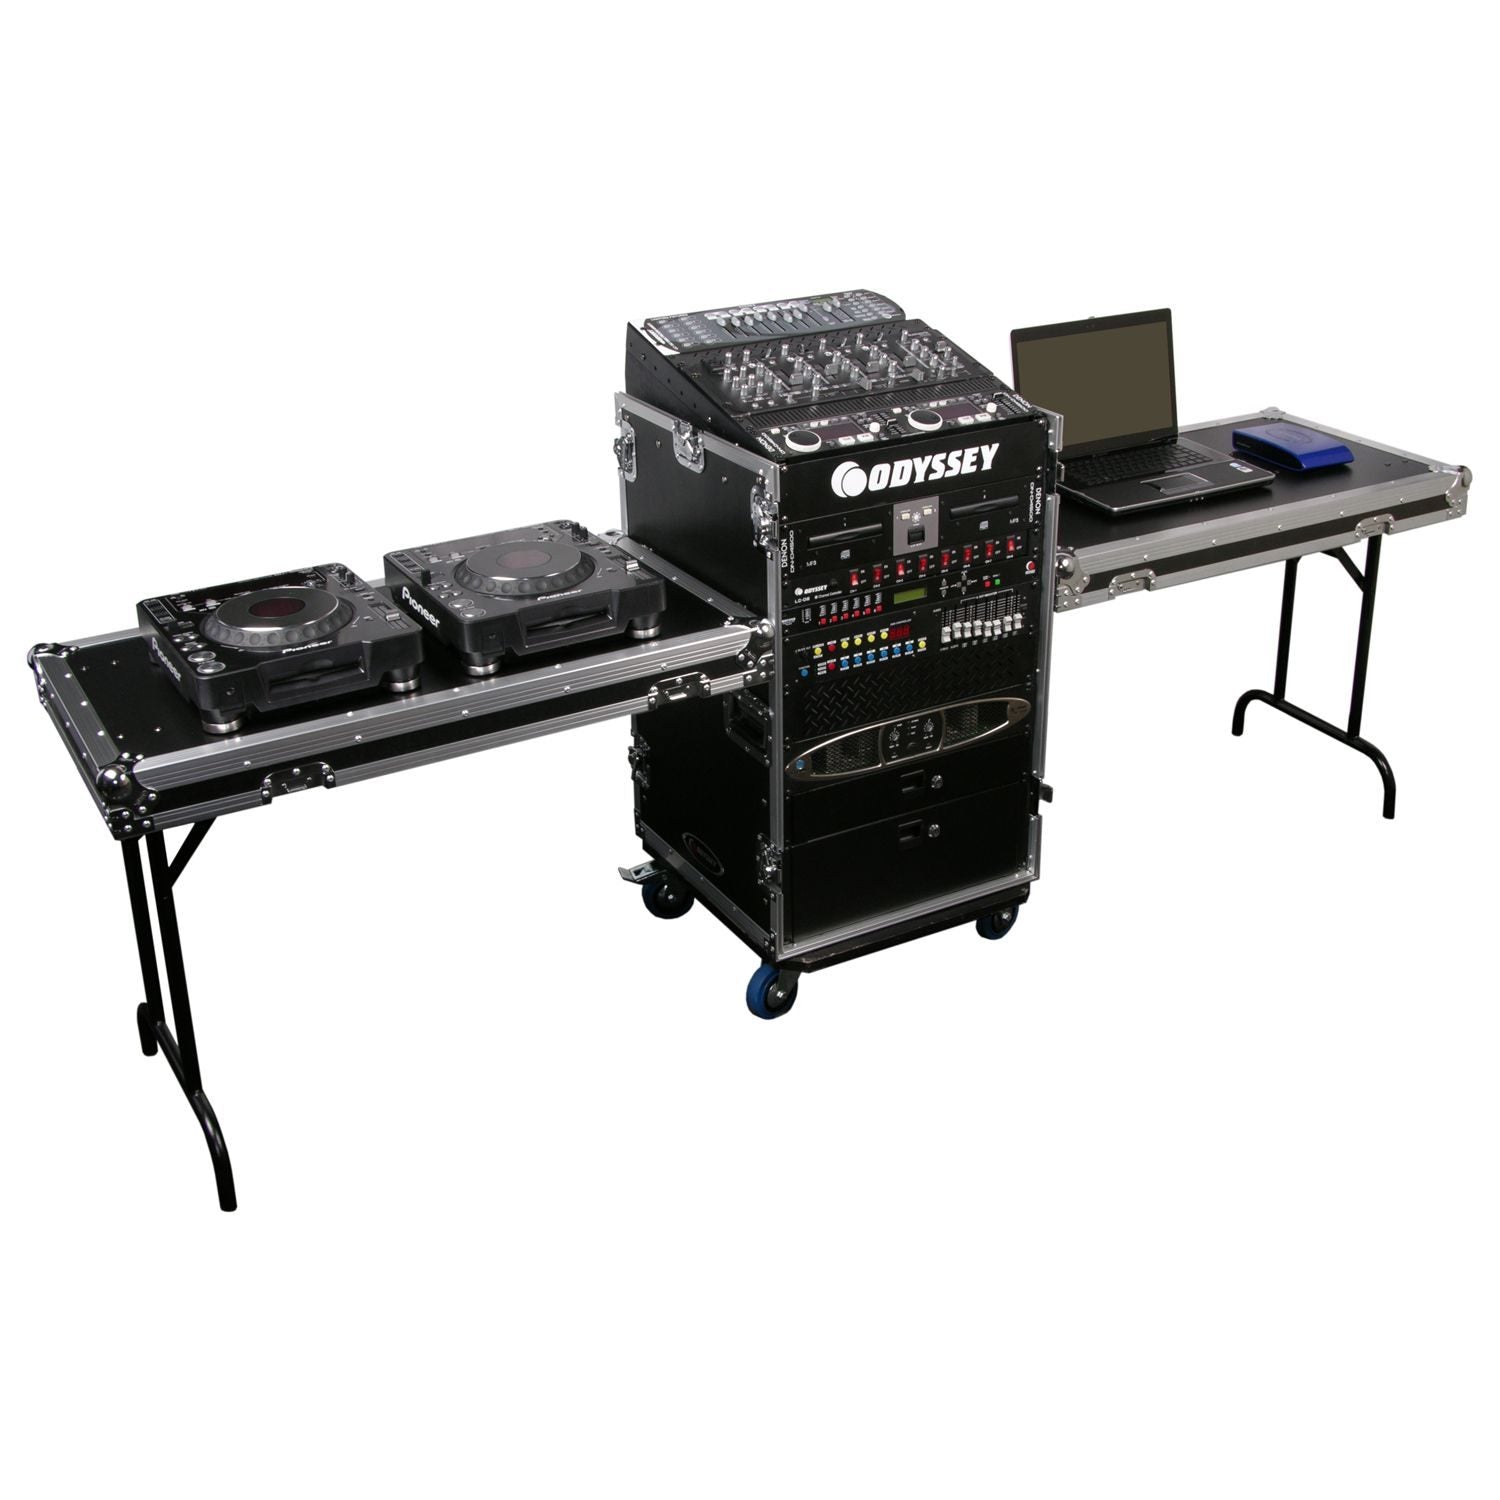 Odyssey FZ1116WDLXII 11U Top Slanted 16U Vertical Pro Combo Rack with Two Side Tables and Casters - Hollywood DJ